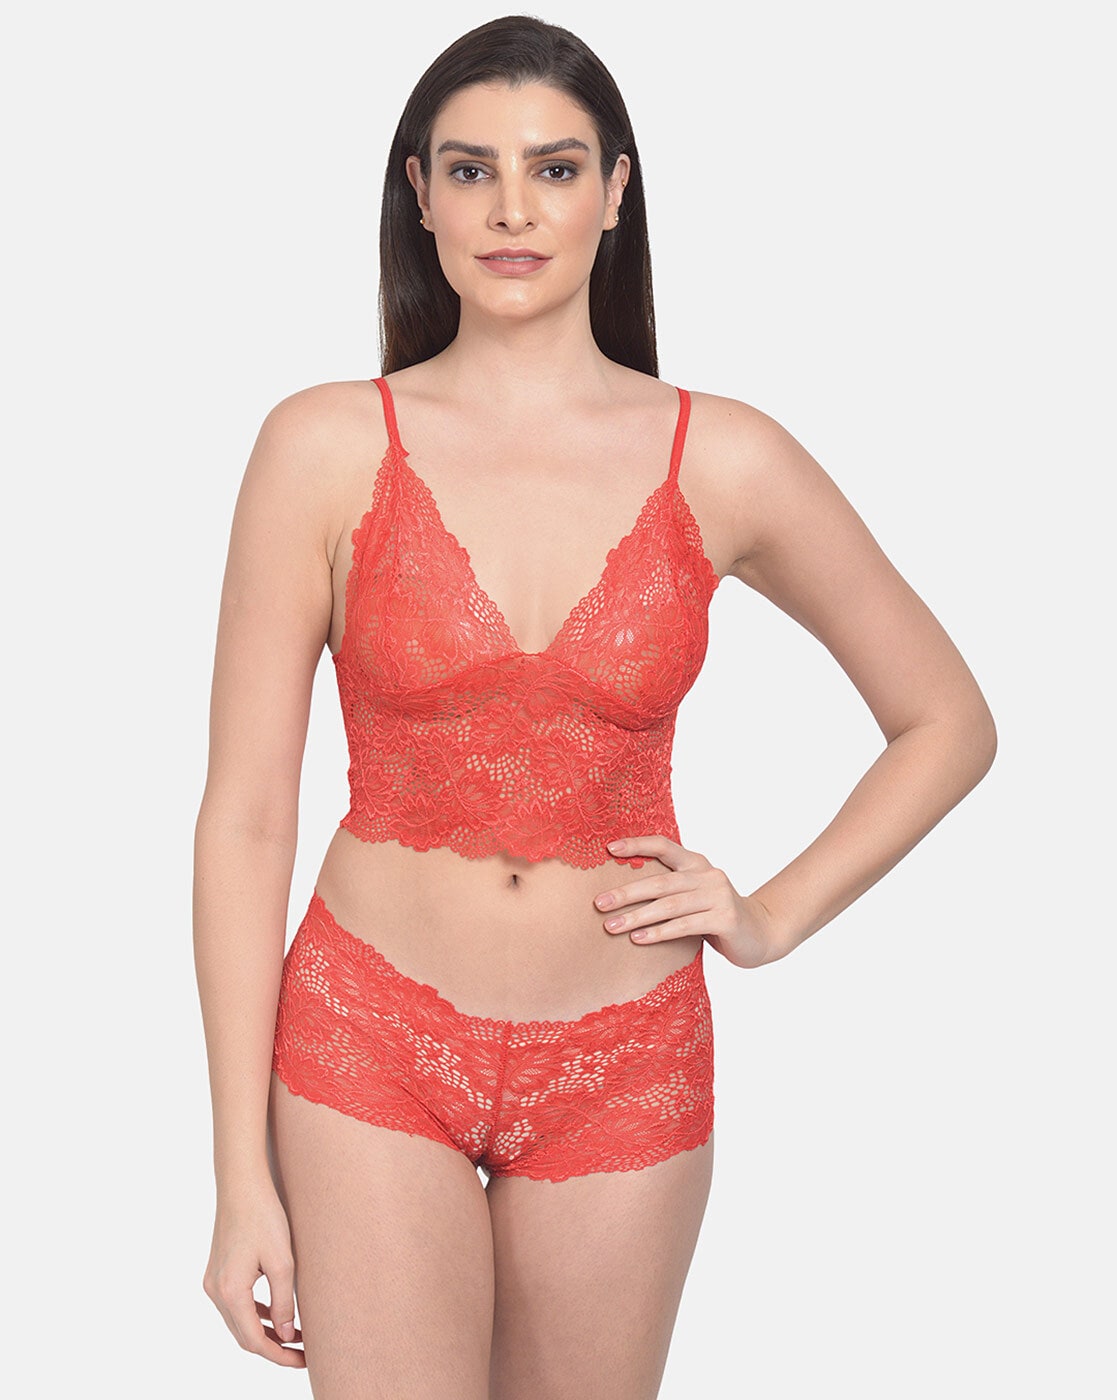 Shyle's lace and mesh Indian lingerie set in smoldering red Only